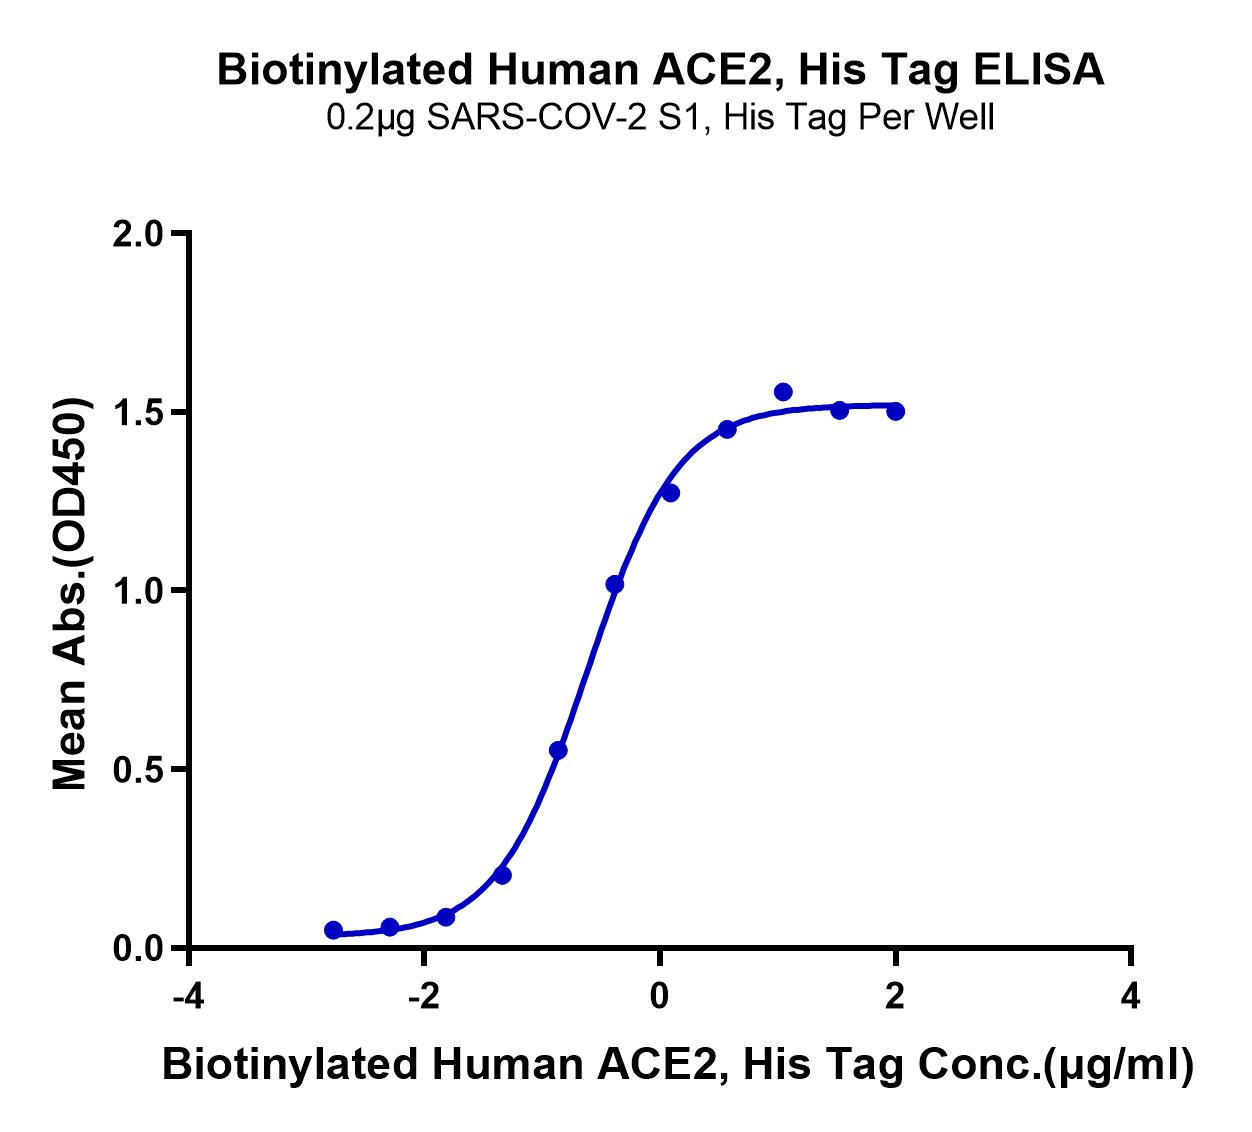 Biotinylated Human ACE2/ACEH Protein (LTP11044)